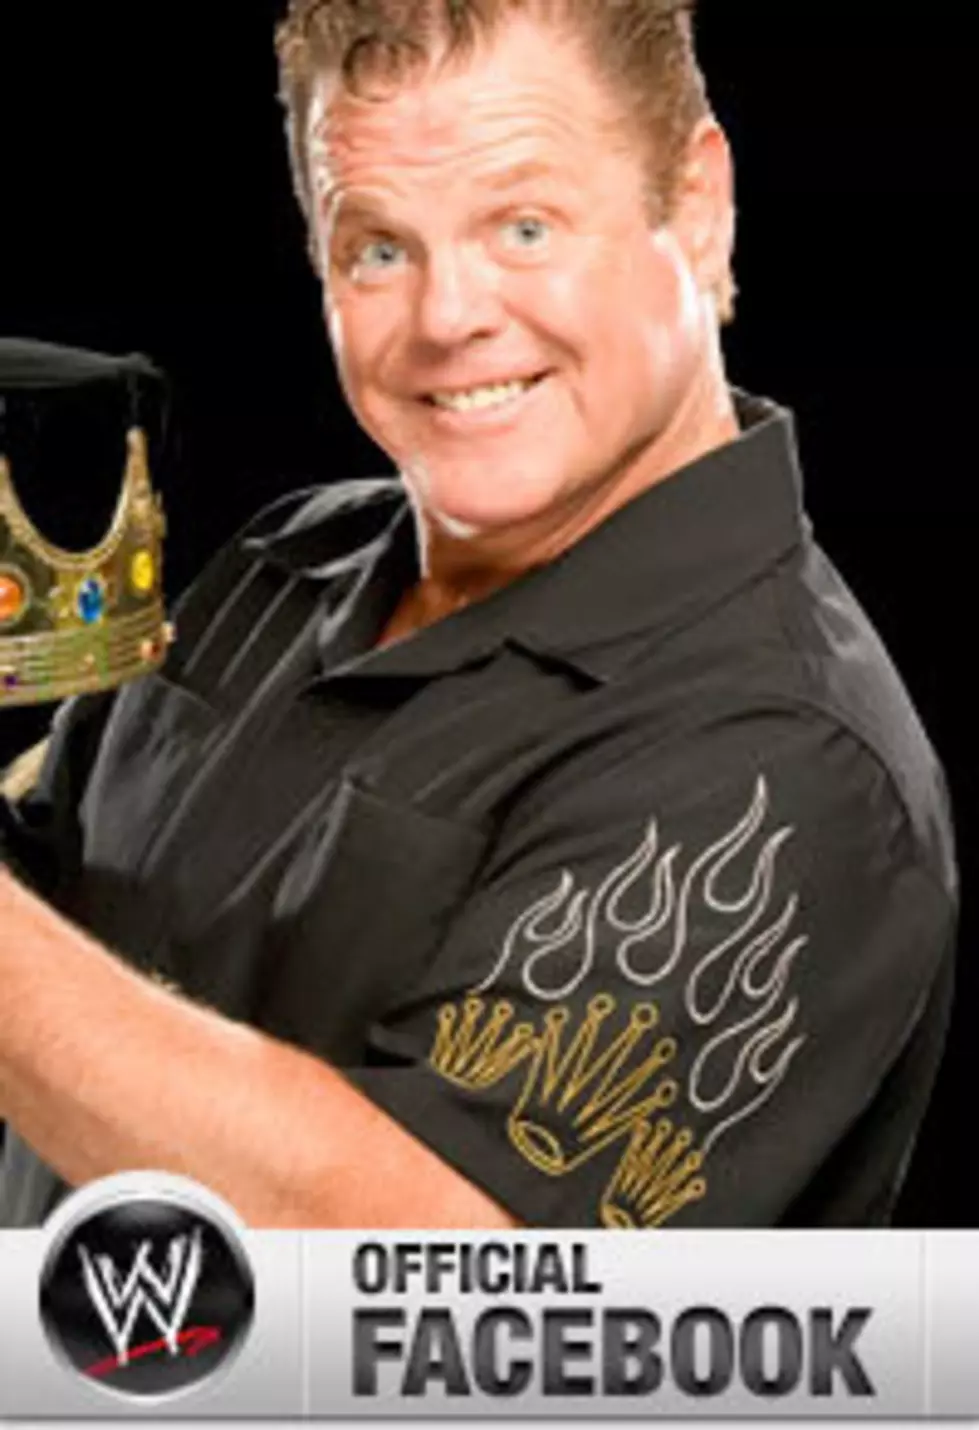 WWE’s Jerry ‘The King’ Lawler Has Heart Attack During Monday Night Raw